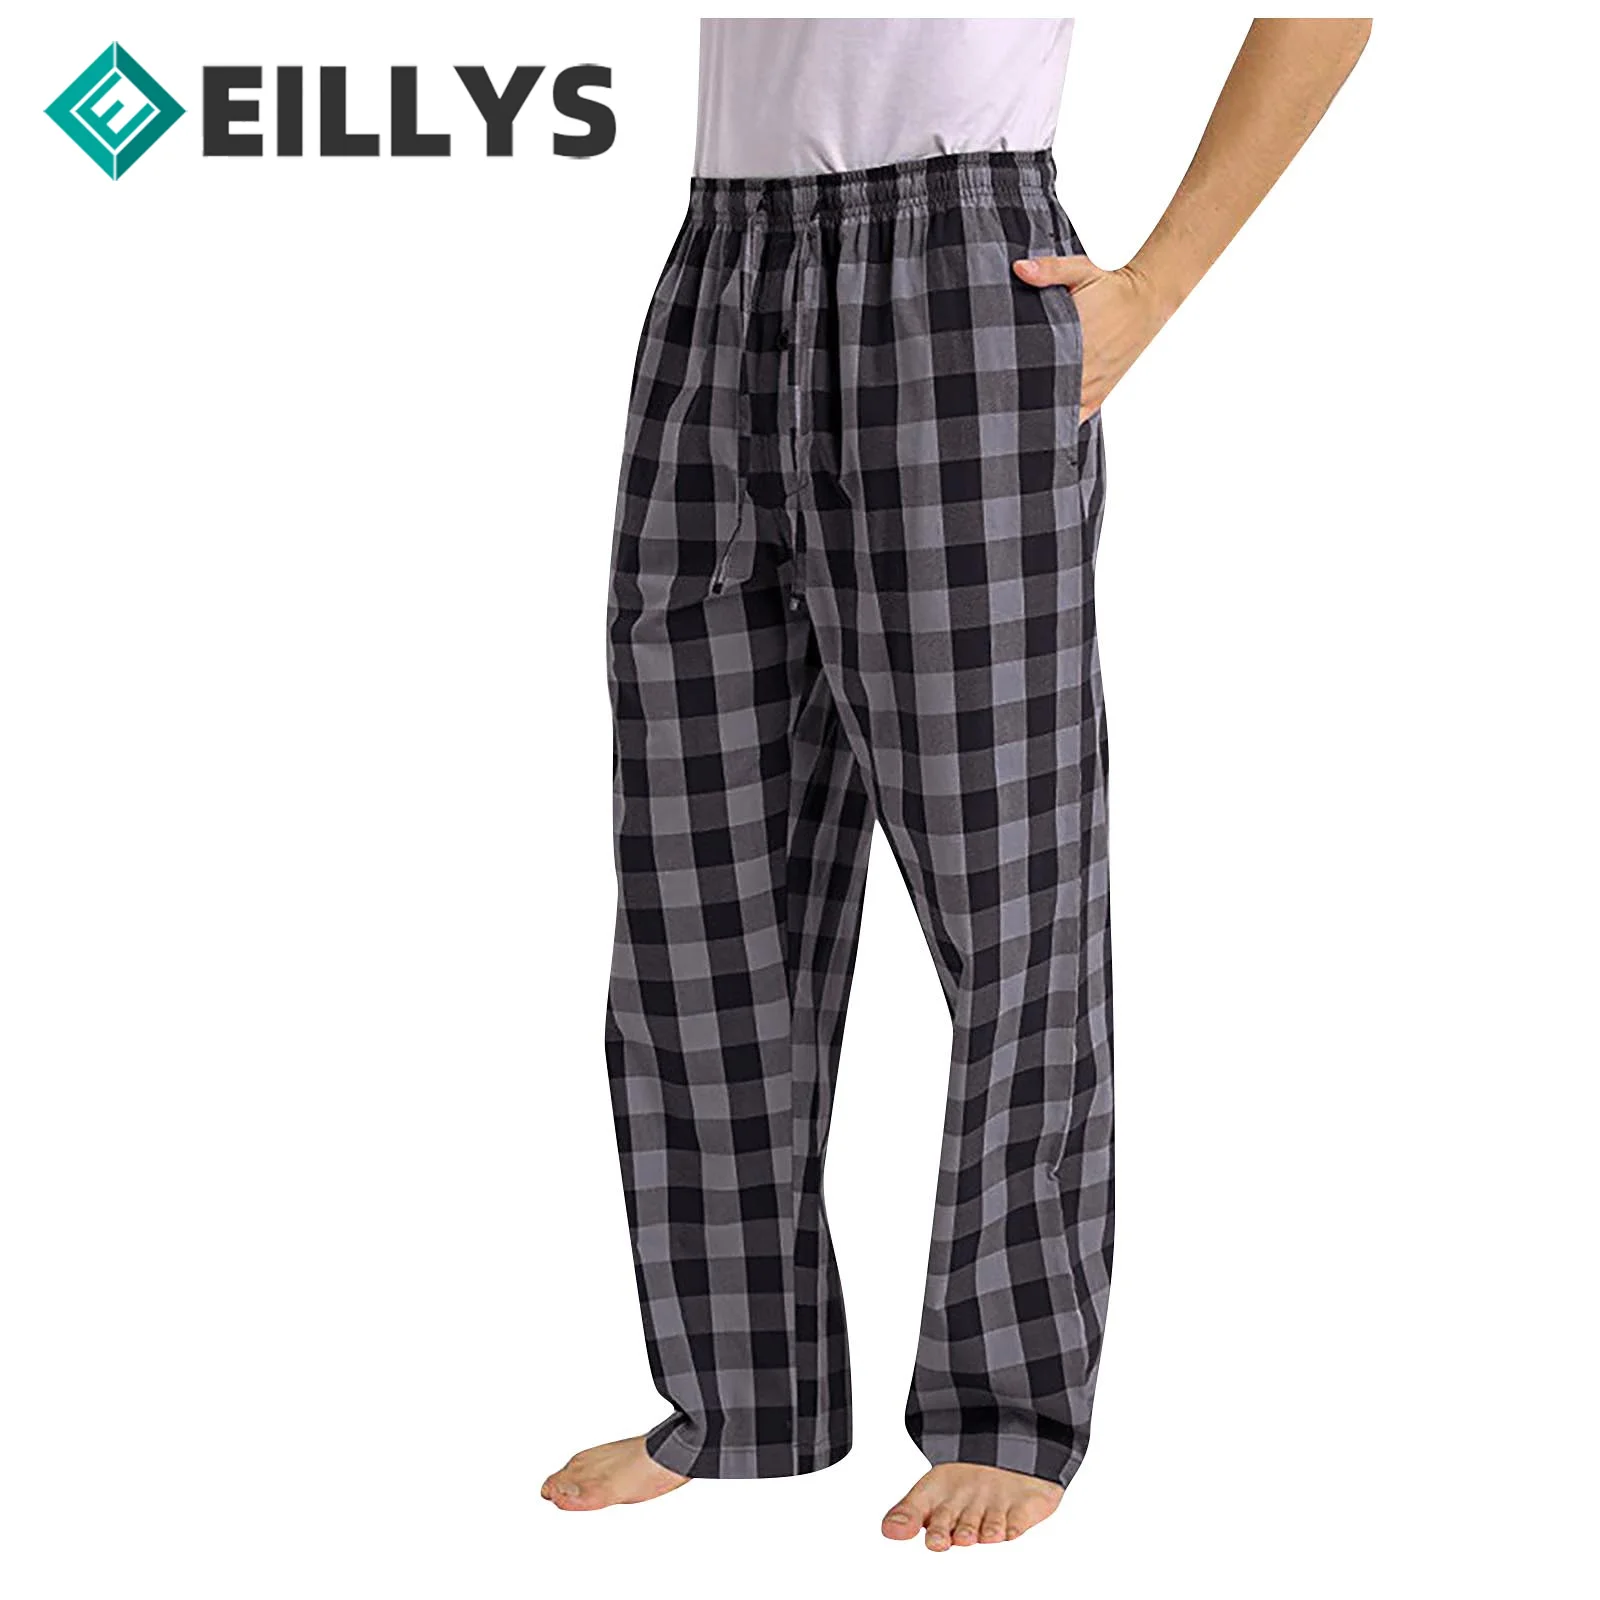 Japanese-style Lattice Home Trousers Elastic Band Men’s Casual Pants Drawstring Loose Bottoms Cotton Casual Straight-leg Pants